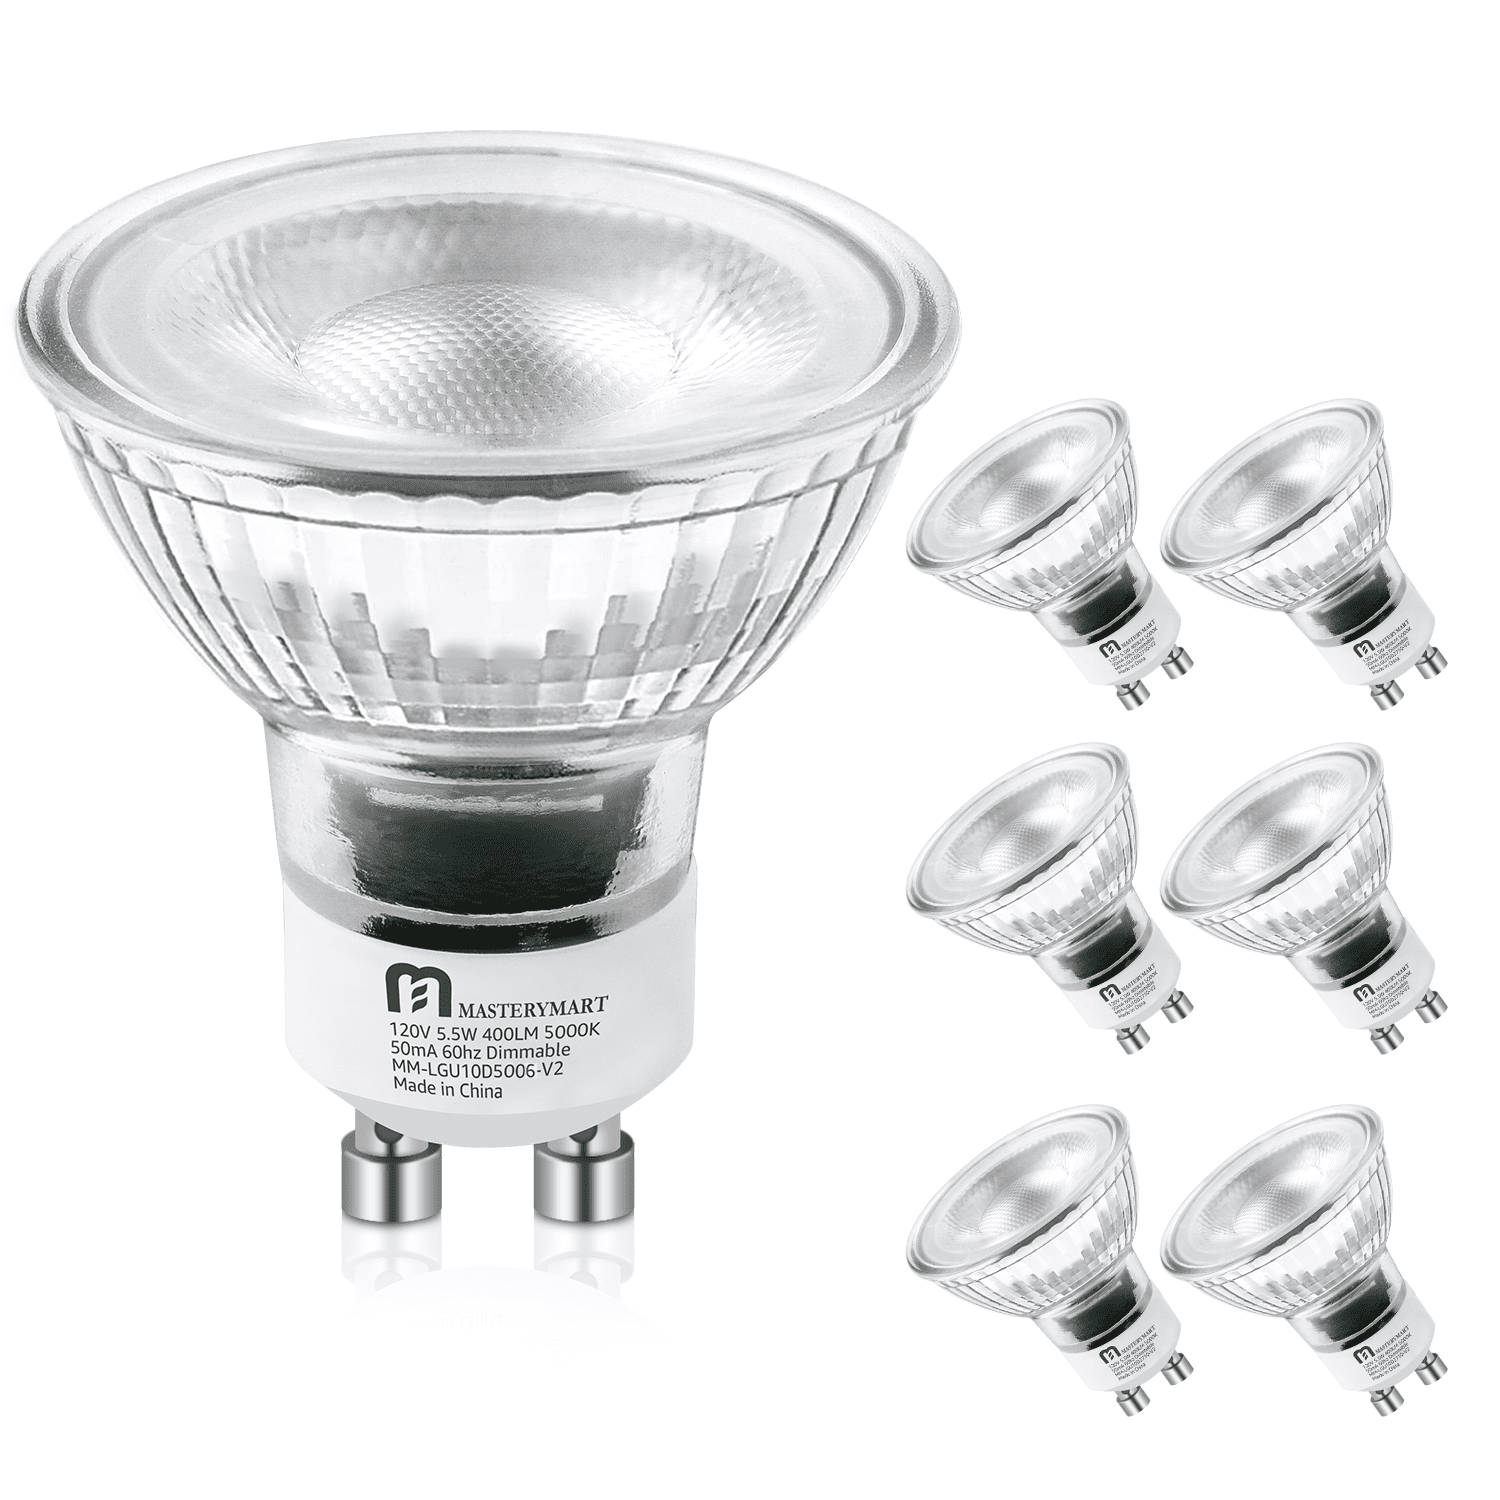 Mastery Mart Dimmable GU10 LED Light Bulbs, 50W Equivalent, 400LM, 2700K  Soft White, Lasts 25,000hrs, 6-pack